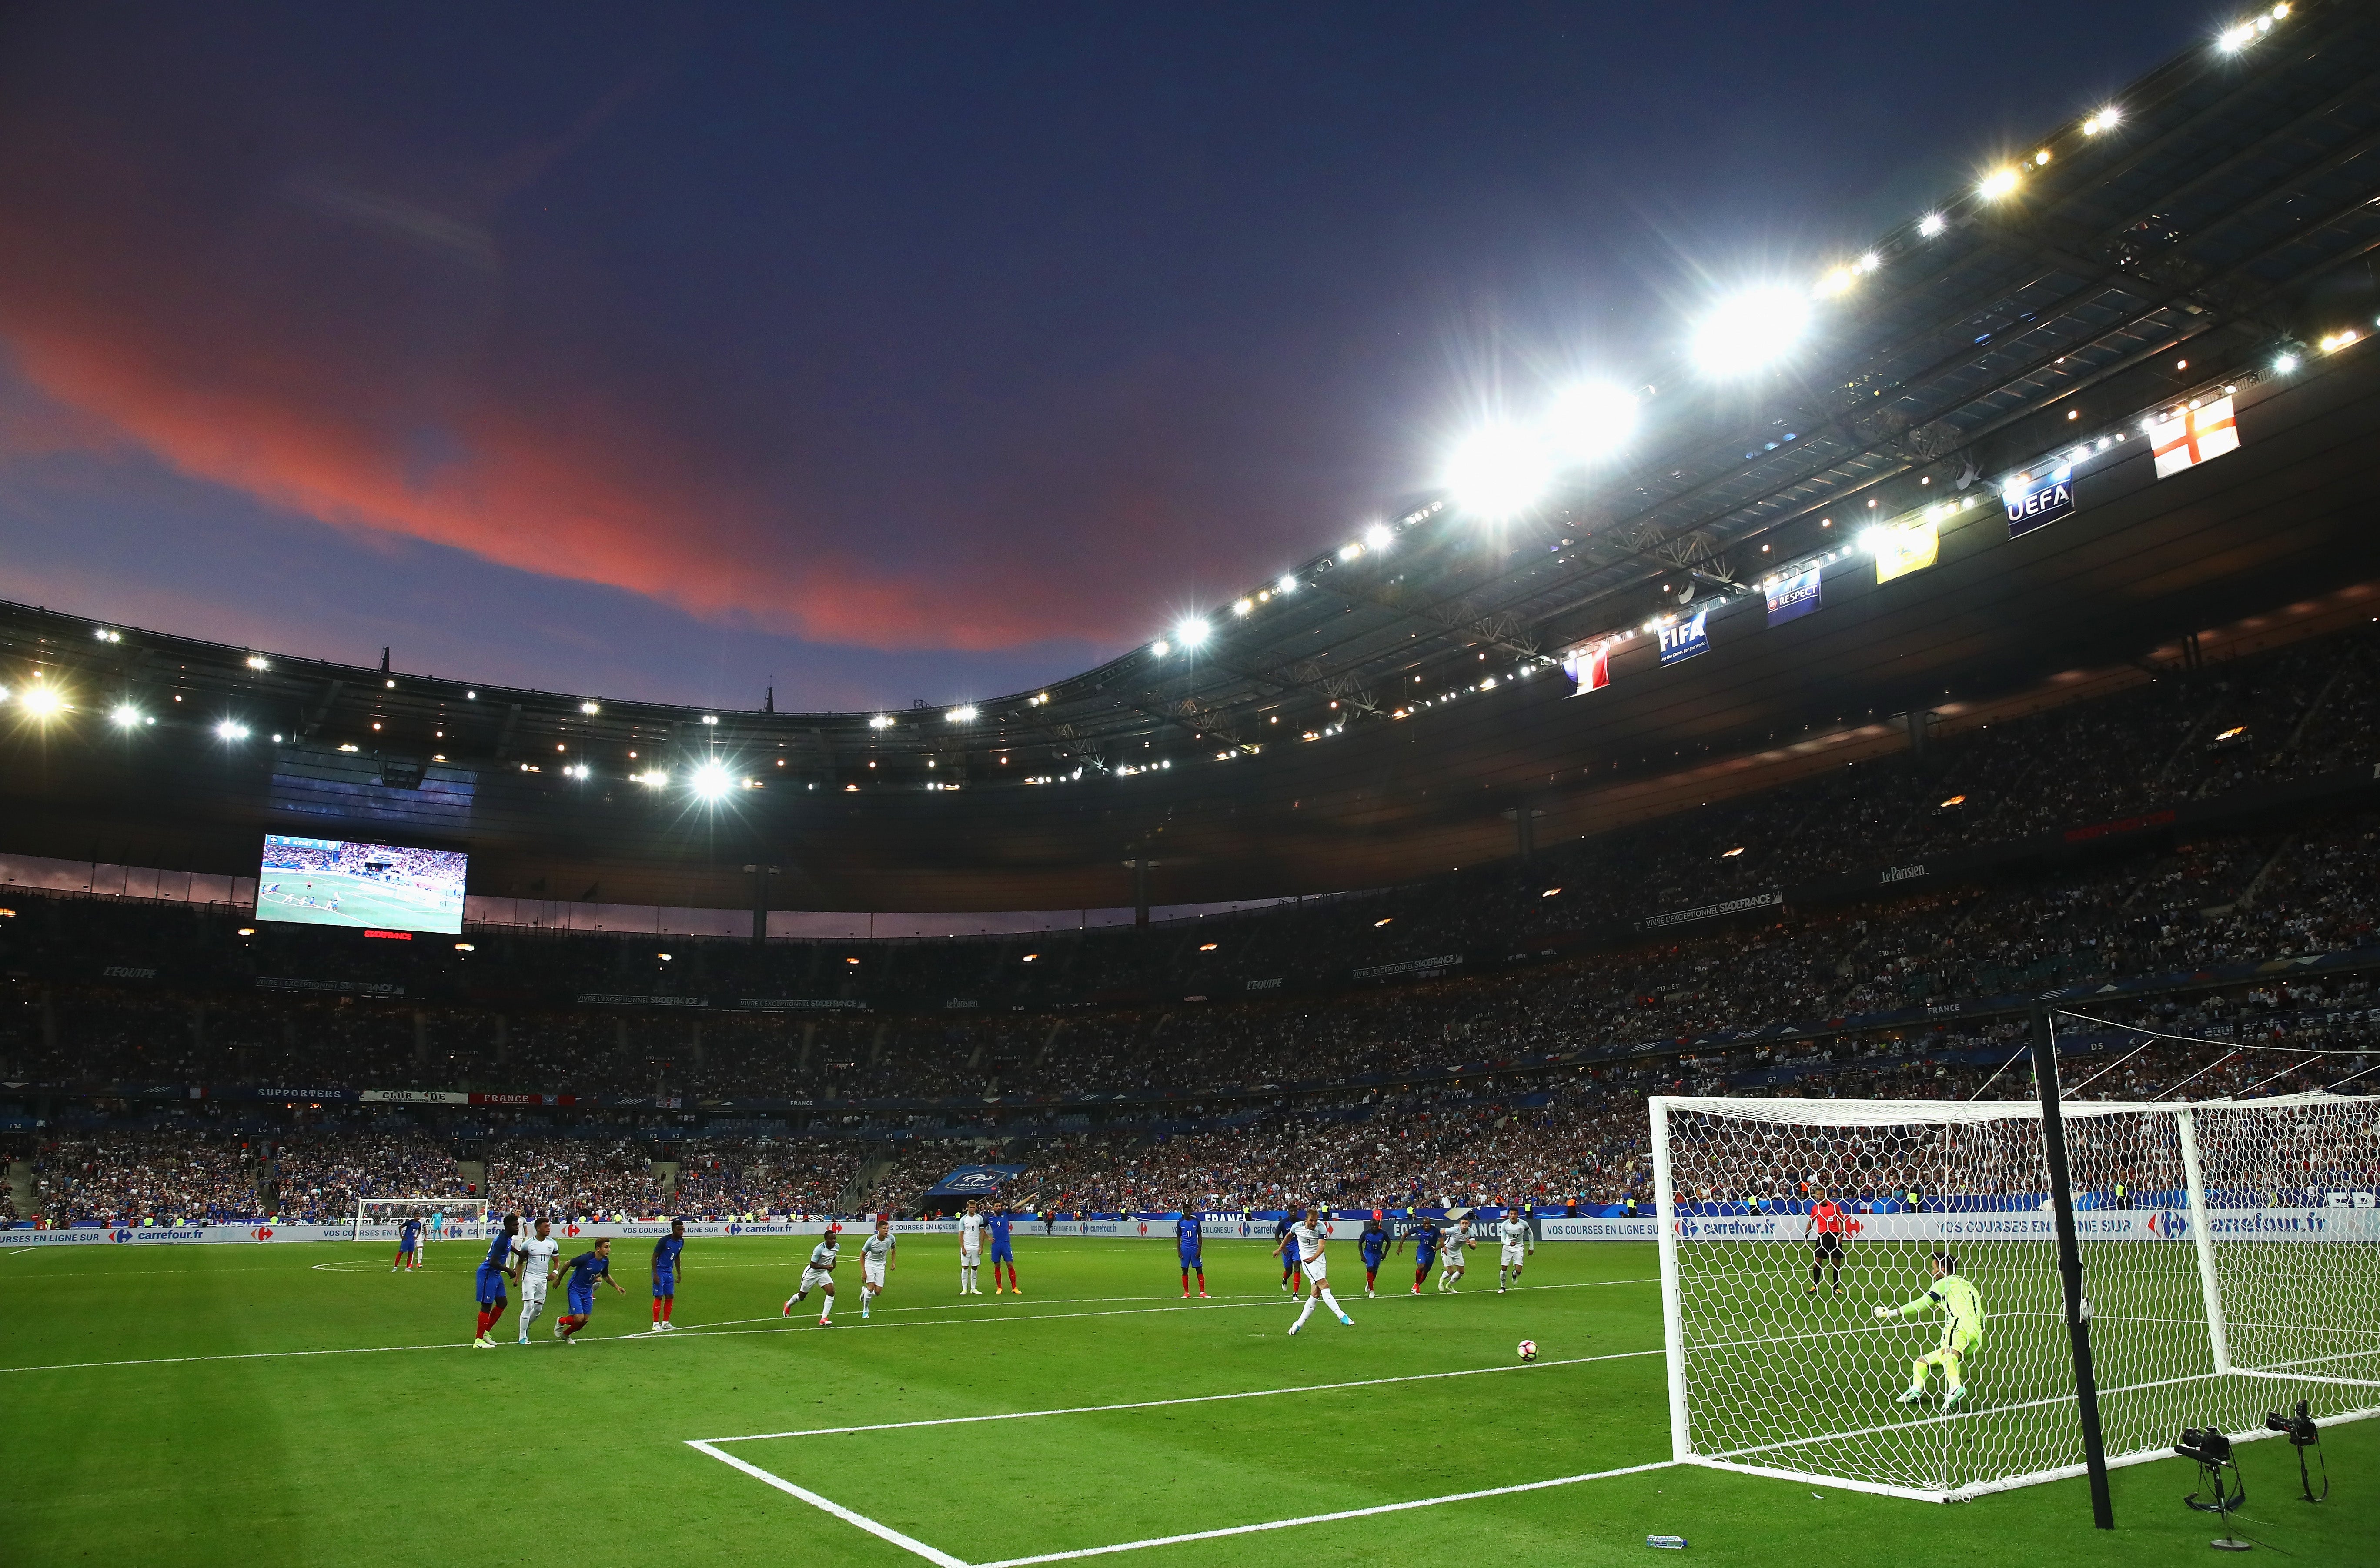 UEFA Champion's League Final Moved From Saint Petersburg to Paris